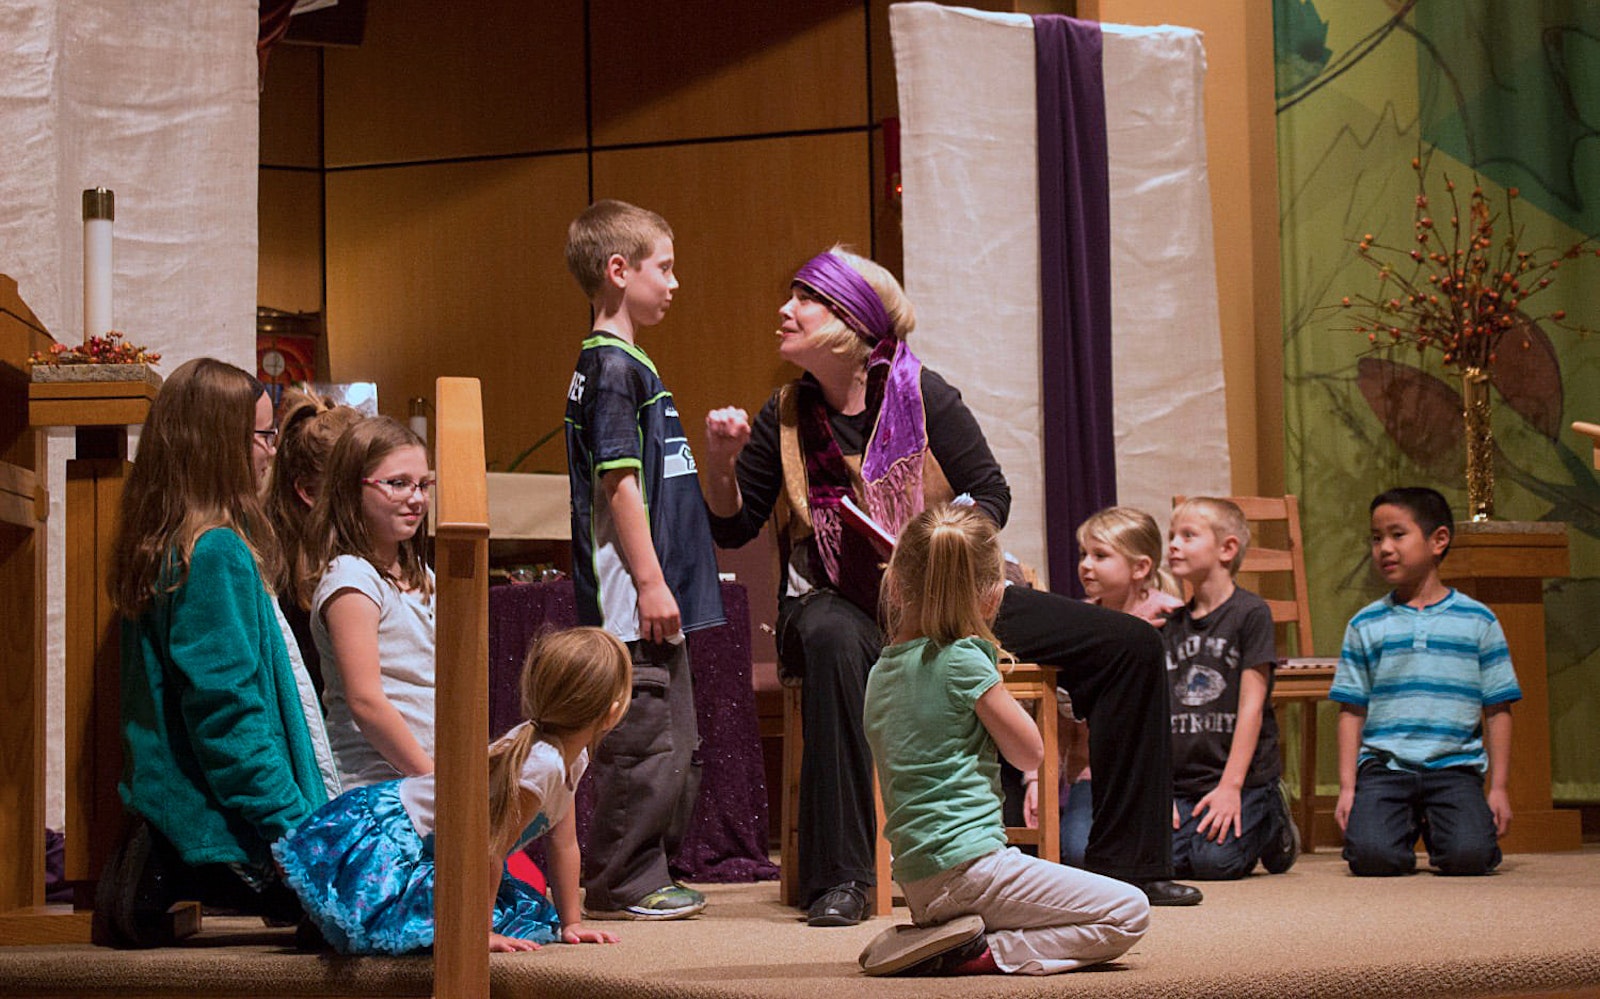 "The Parable Project" engages children and adults alike through interactive and imaginative dramatizations of Jesus' parables.